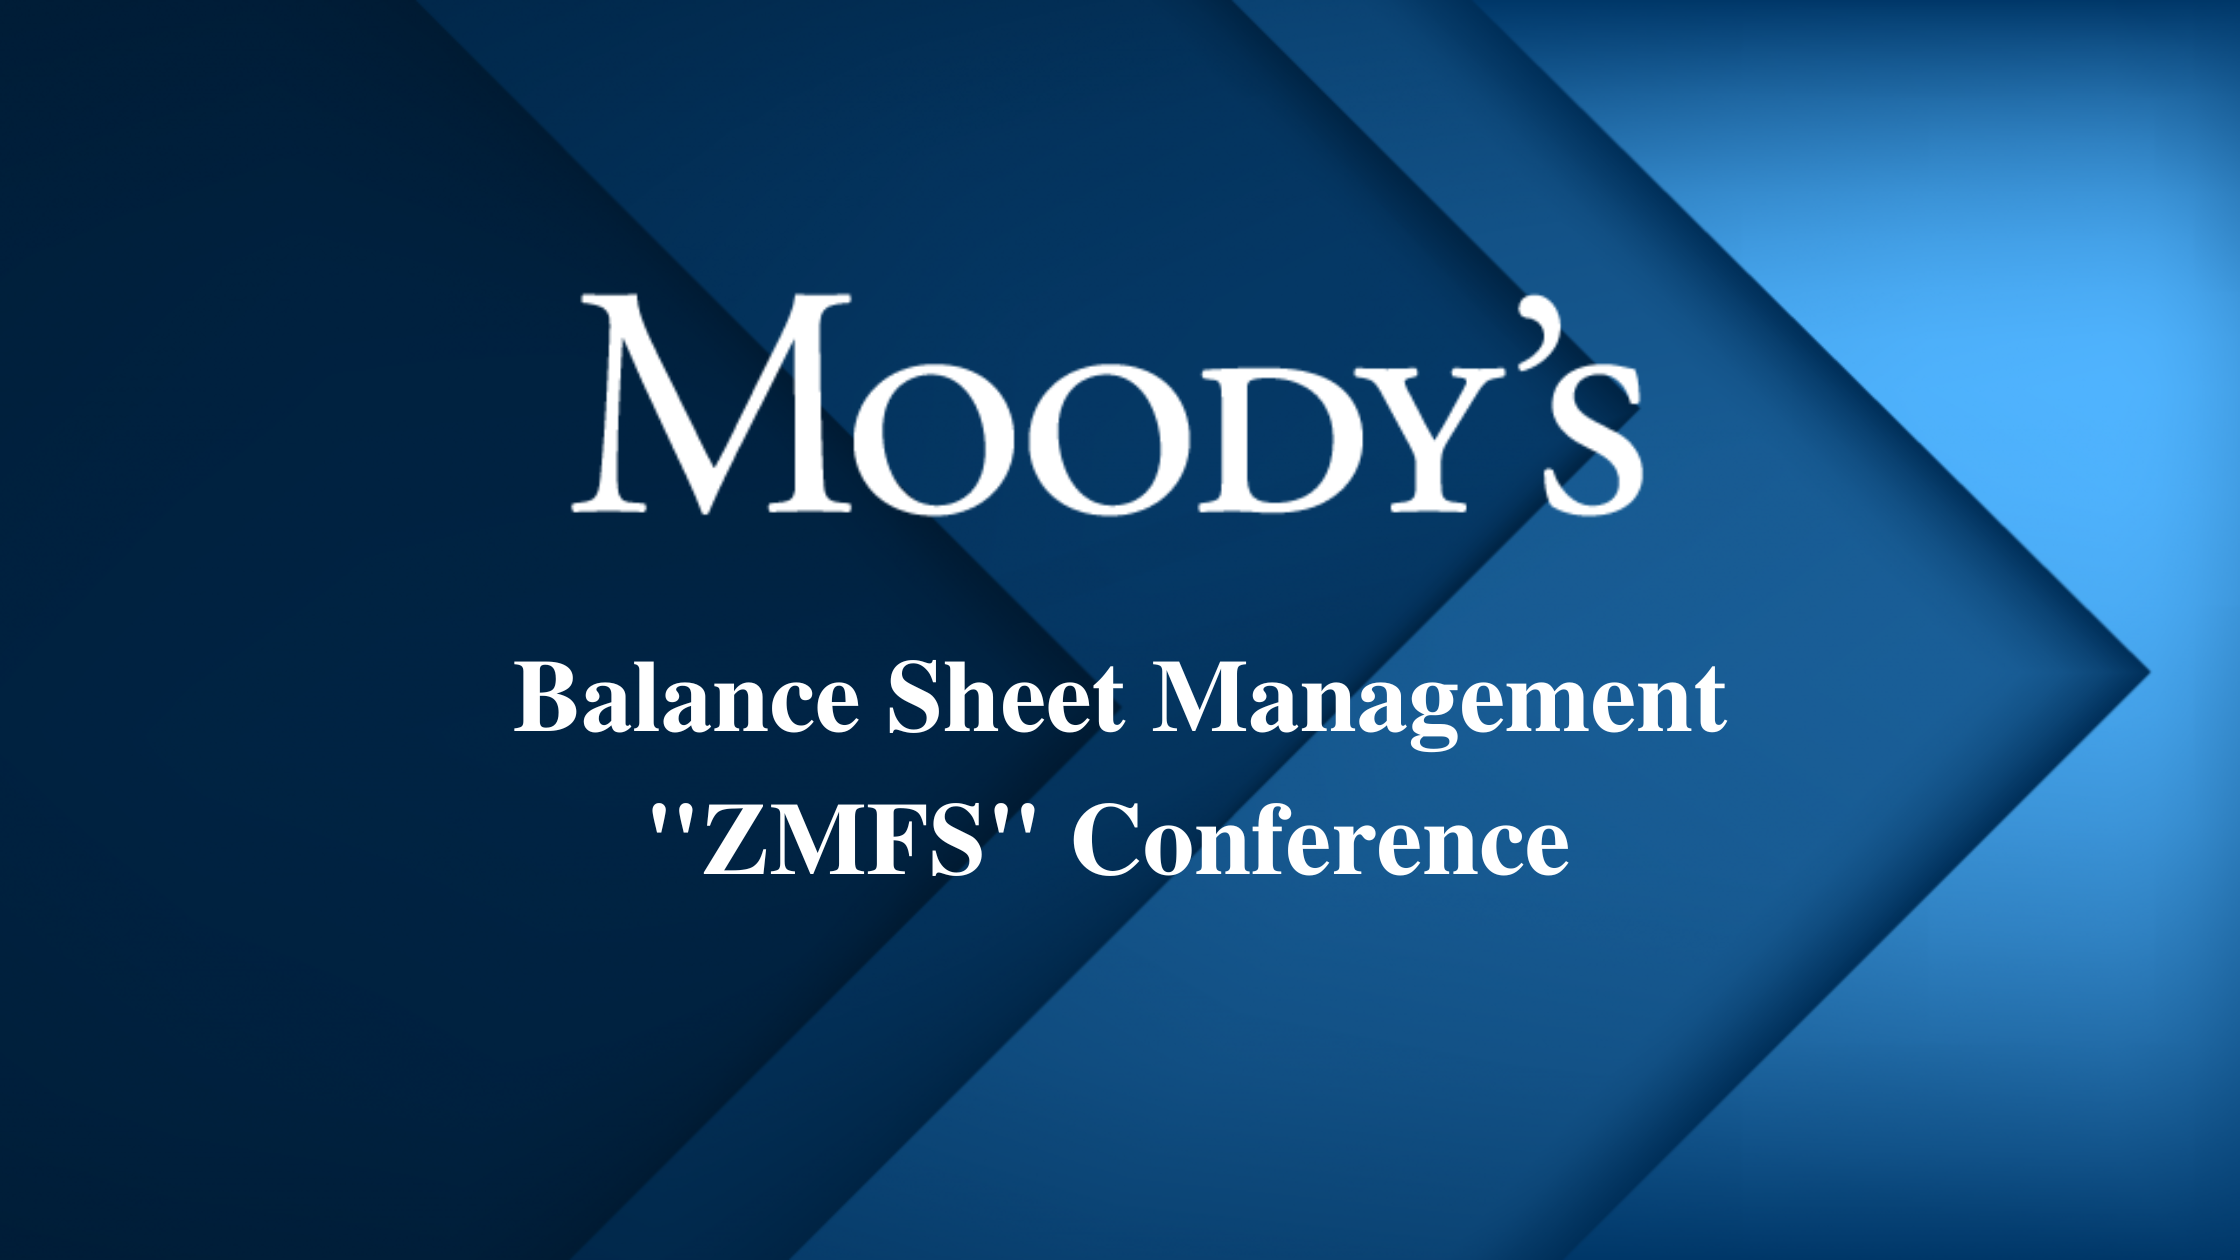 Moody's ZMFS Conference